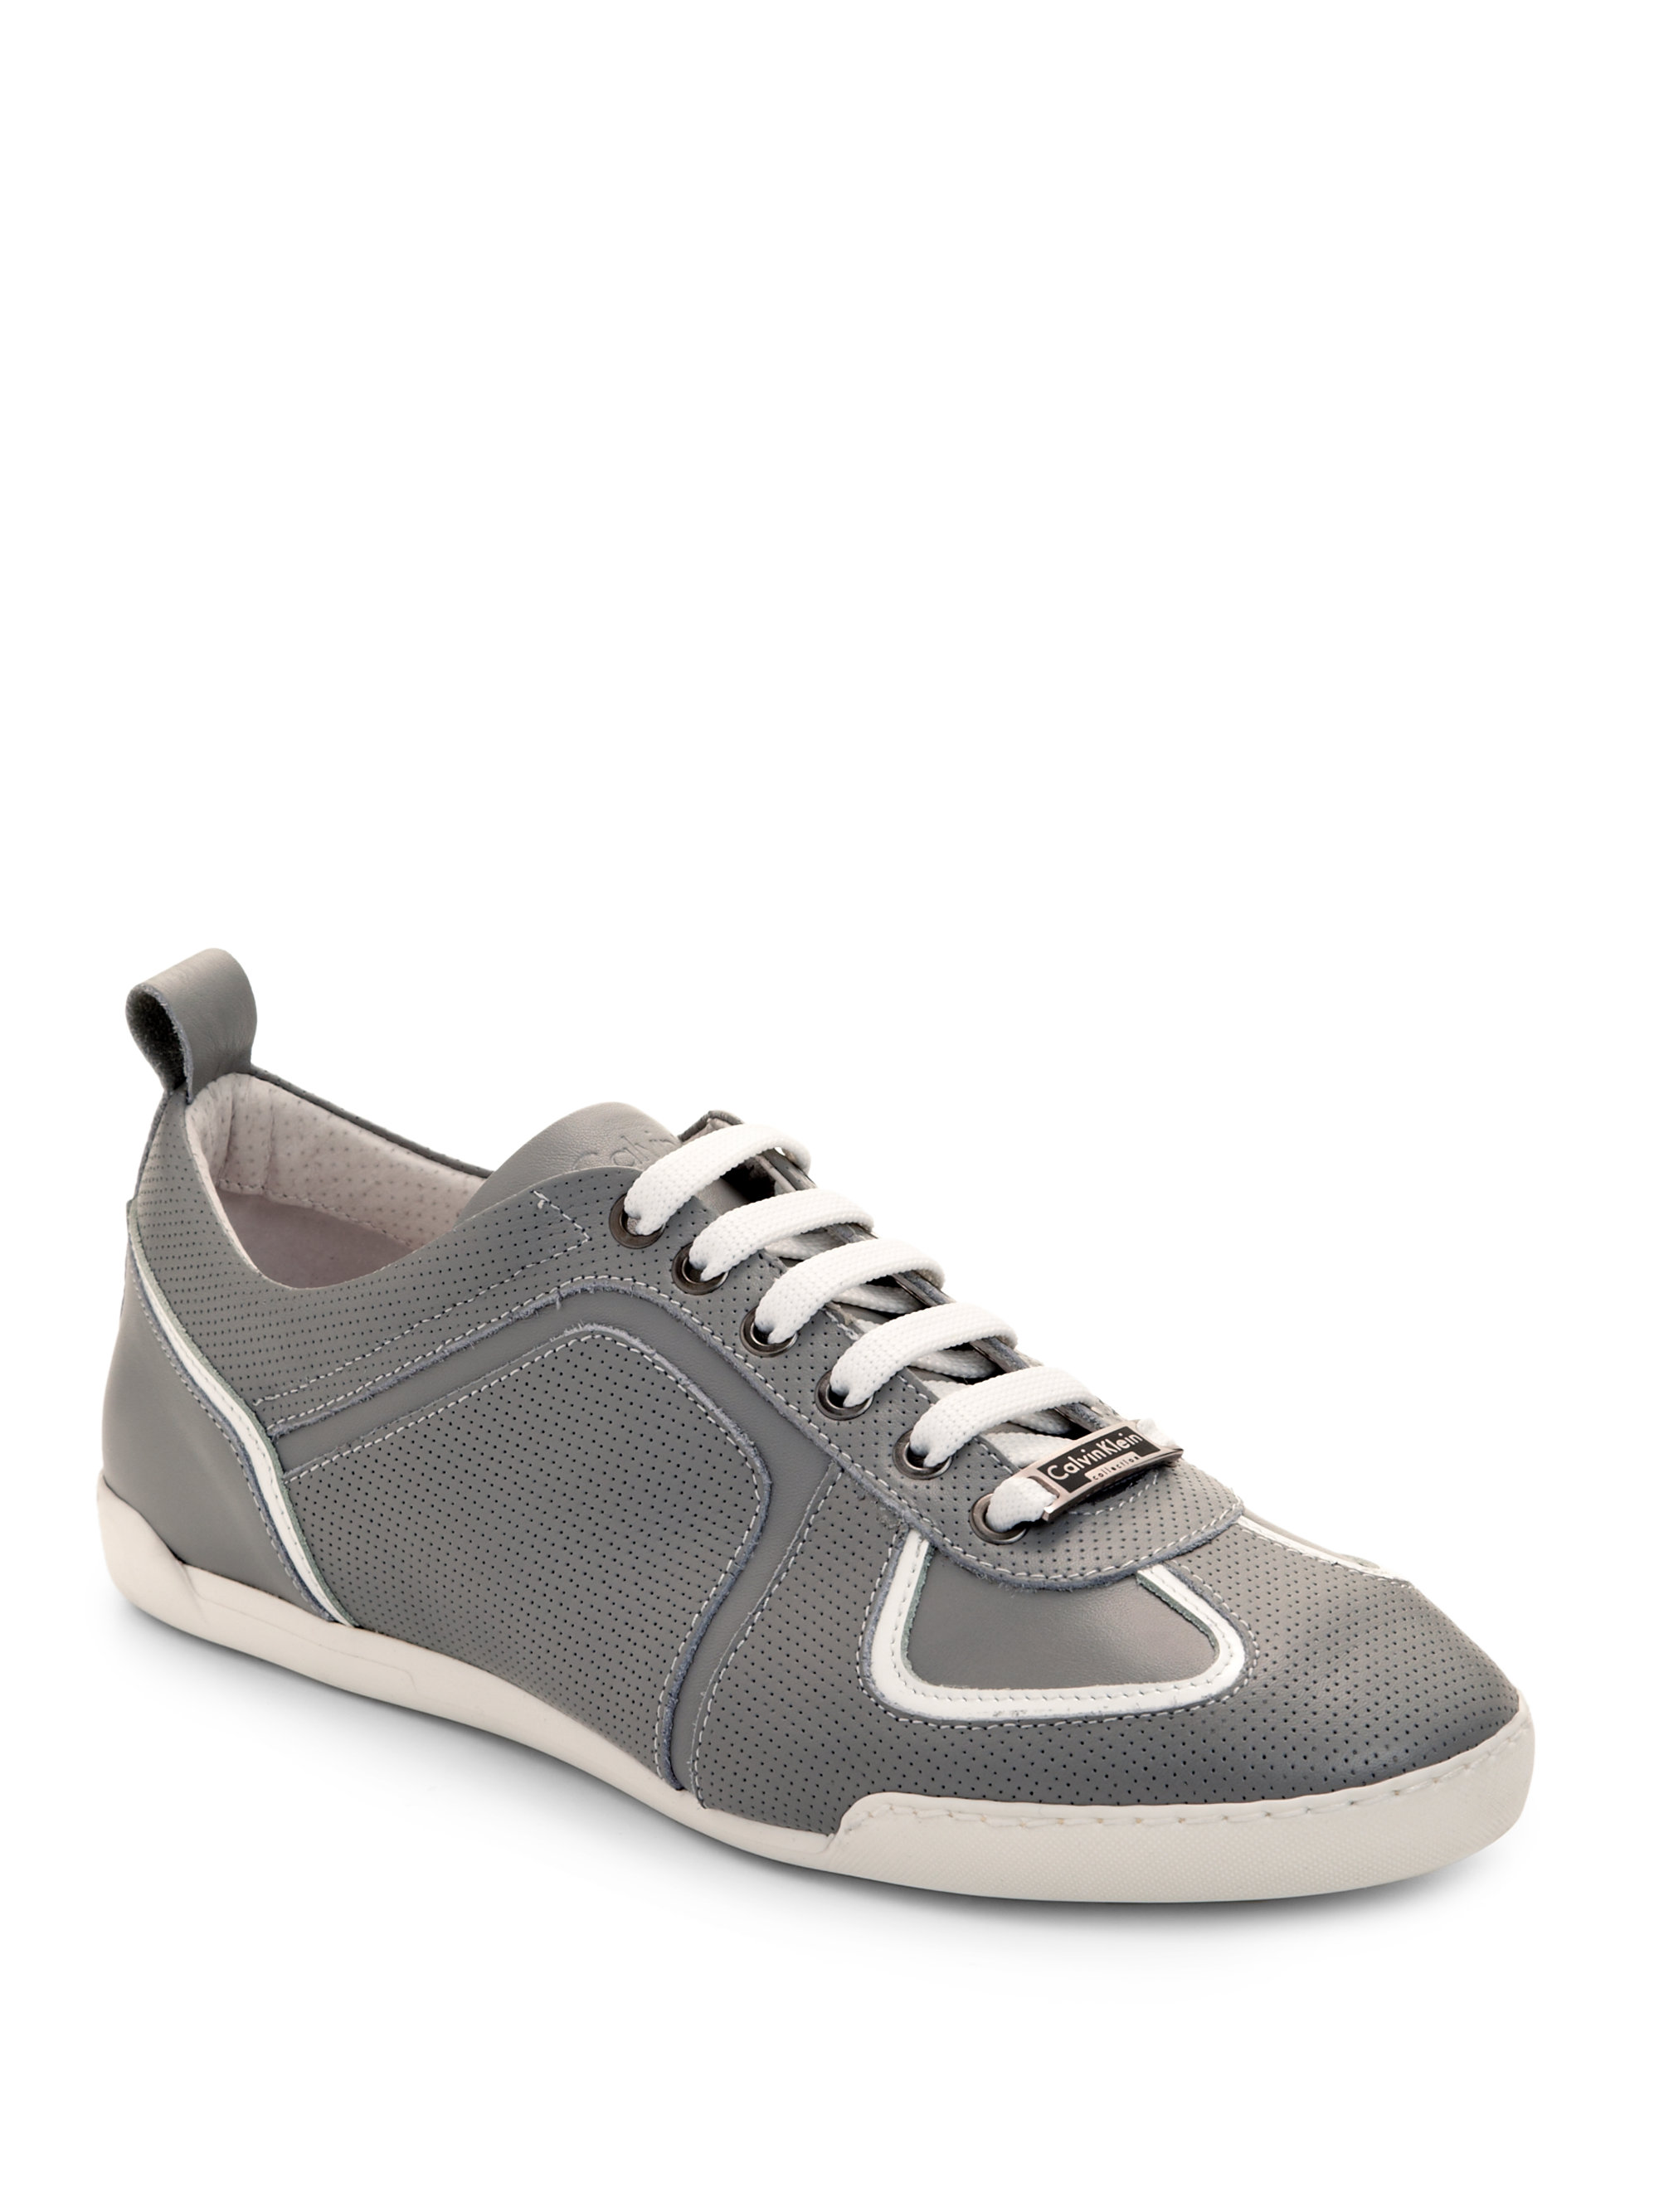 Calvin Klein Low Top Lace-Up Sneakers in Gray for Men (GREY) | Lyst